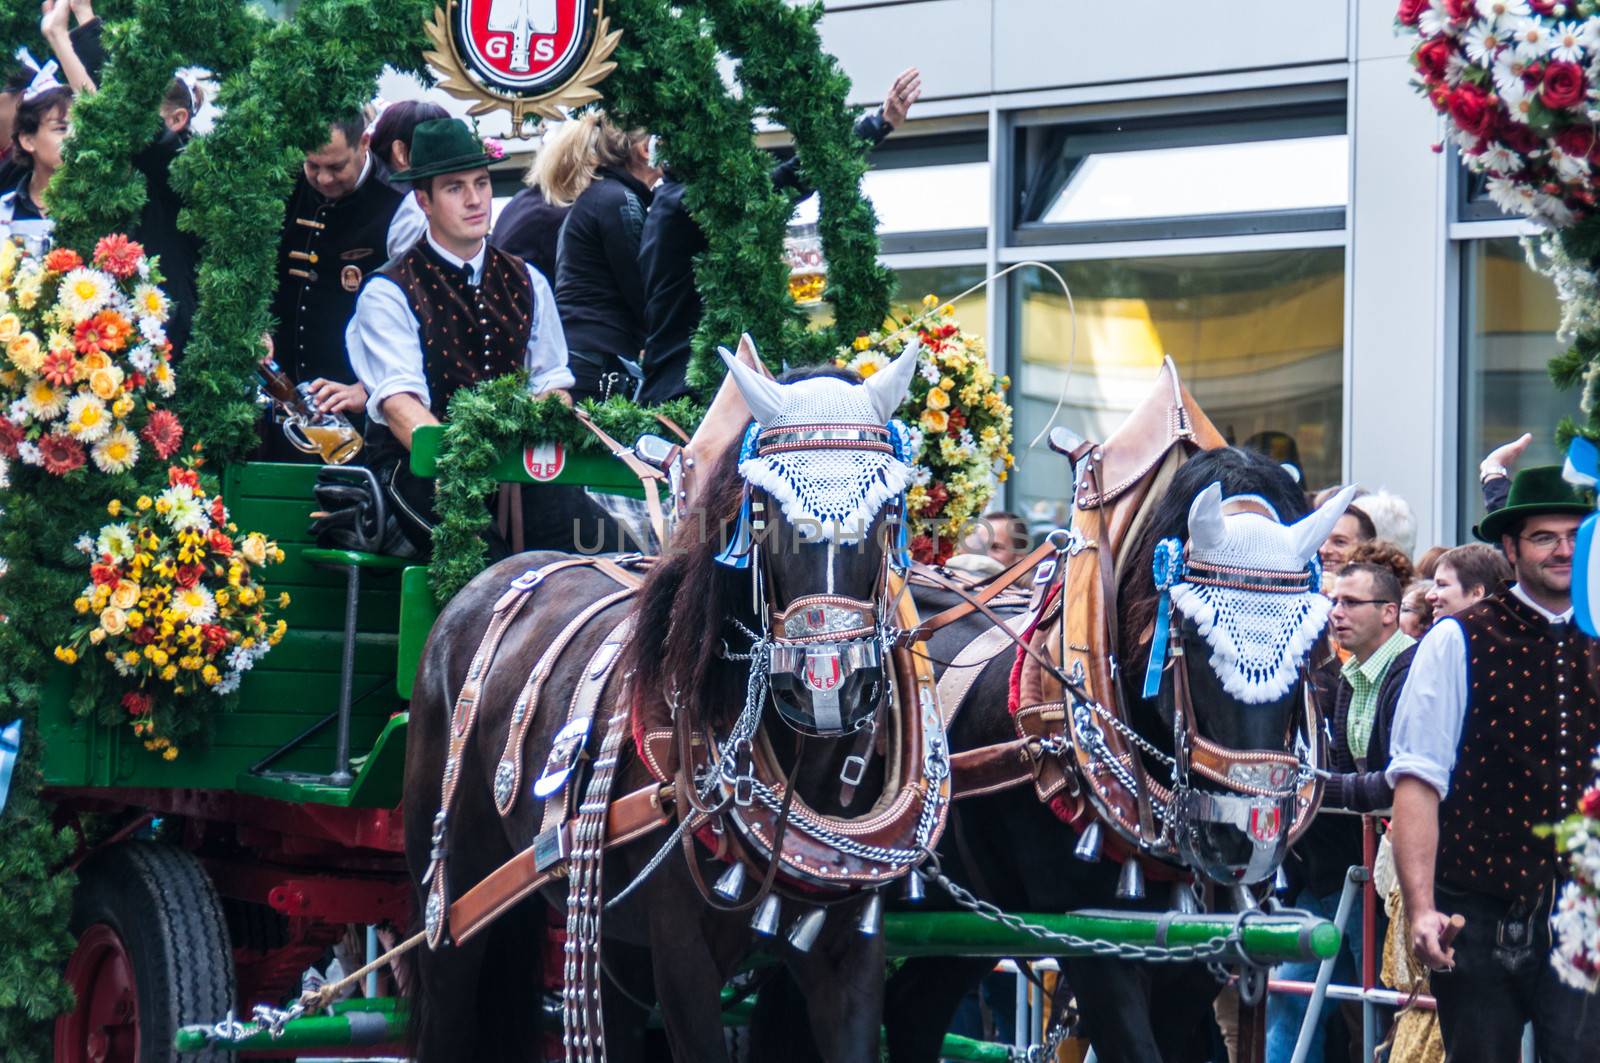 Parade of the hosts of the Wiesn by Jule_Berlin